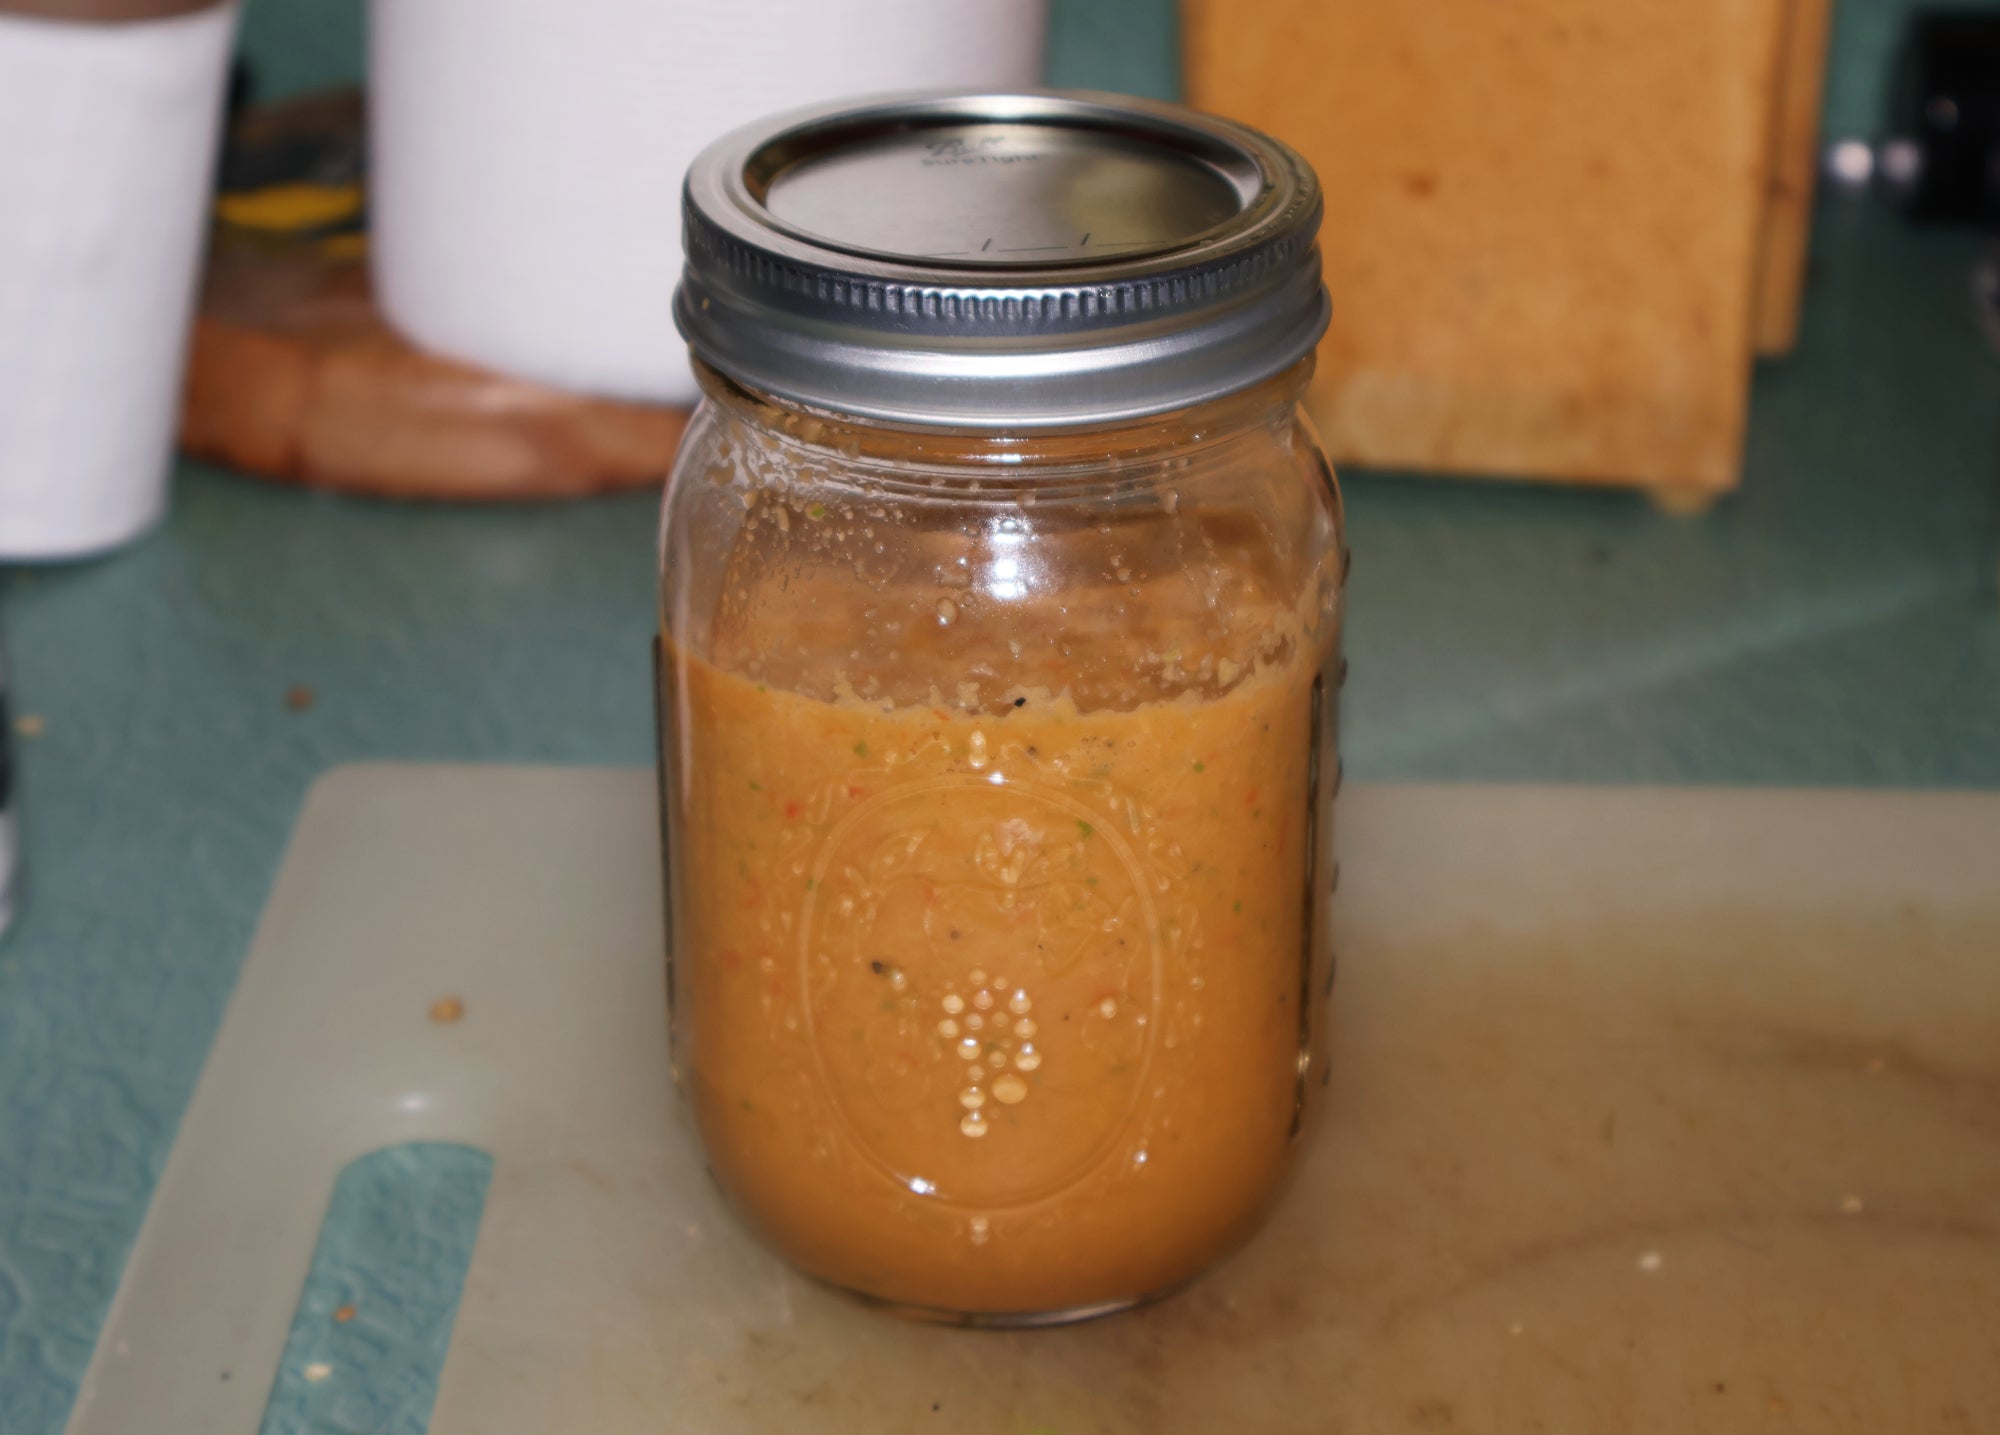 A mason jar full of spicy red hot sauce, from a homemade hot sauce recipe.